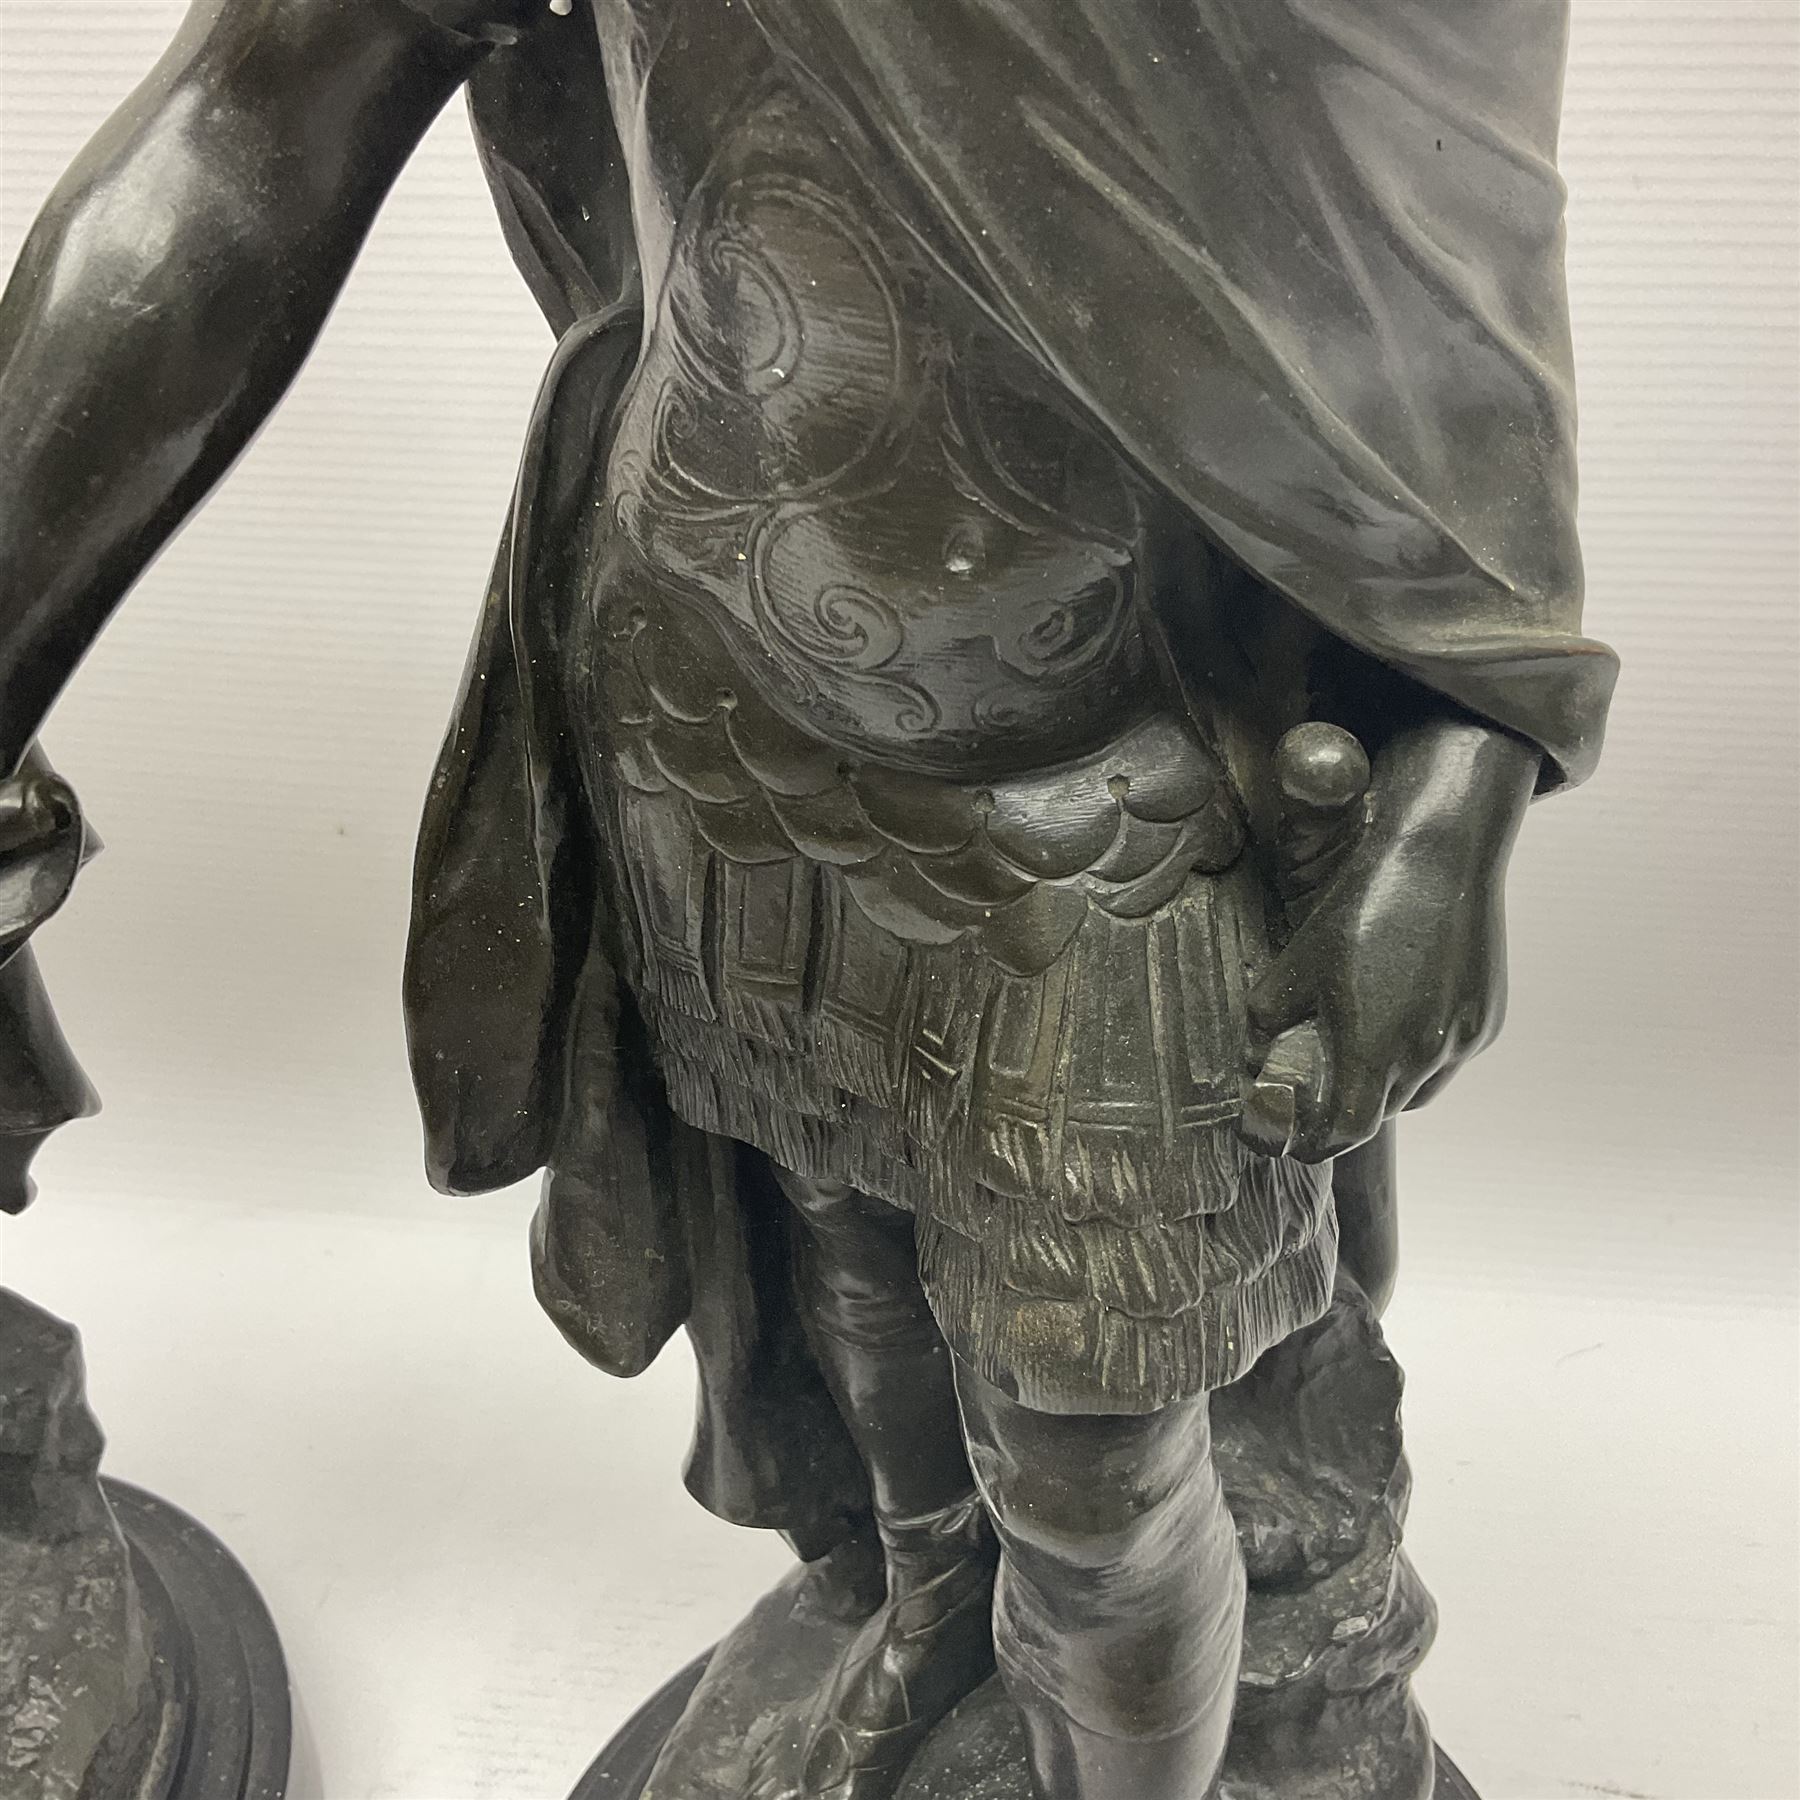 After Edouard Drouot pair of bronzed figures modelled as Roman soldiers - Image 5 of 23